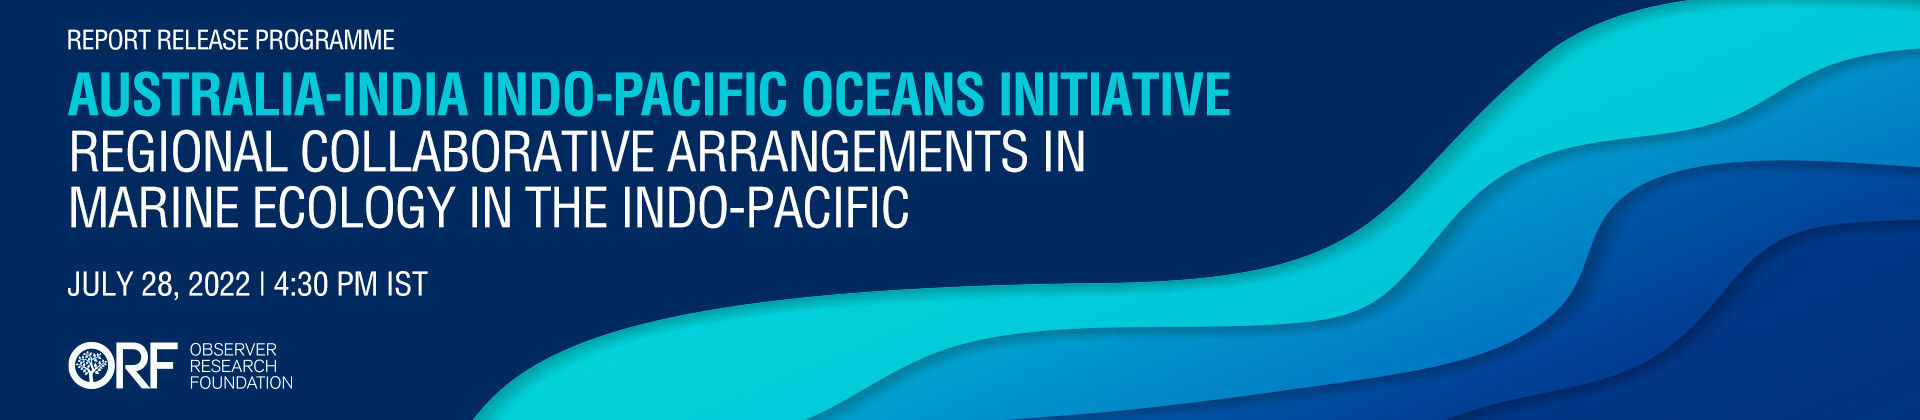 Report Release | Australia-India Indo-Pacific Oceans Initiative: Regional Collaborative Arrangements in Marine Ecology in the Indo-Pacific